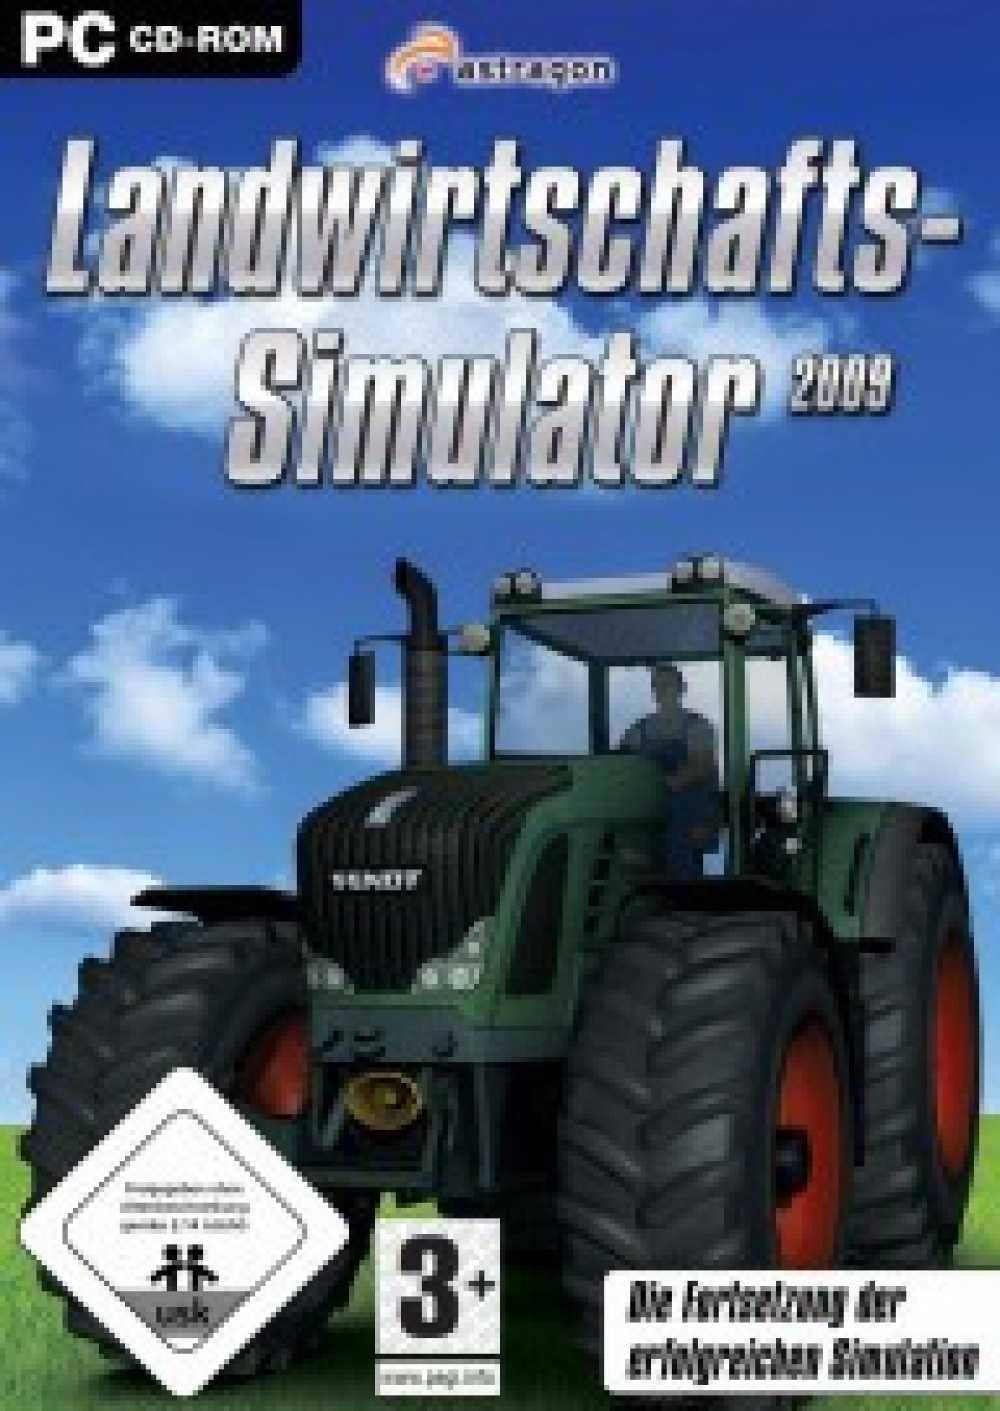 Landwirtschafts-Simulator 2009  Video Game Reviews and Previews PC, PS4,  Xbox One and mobile